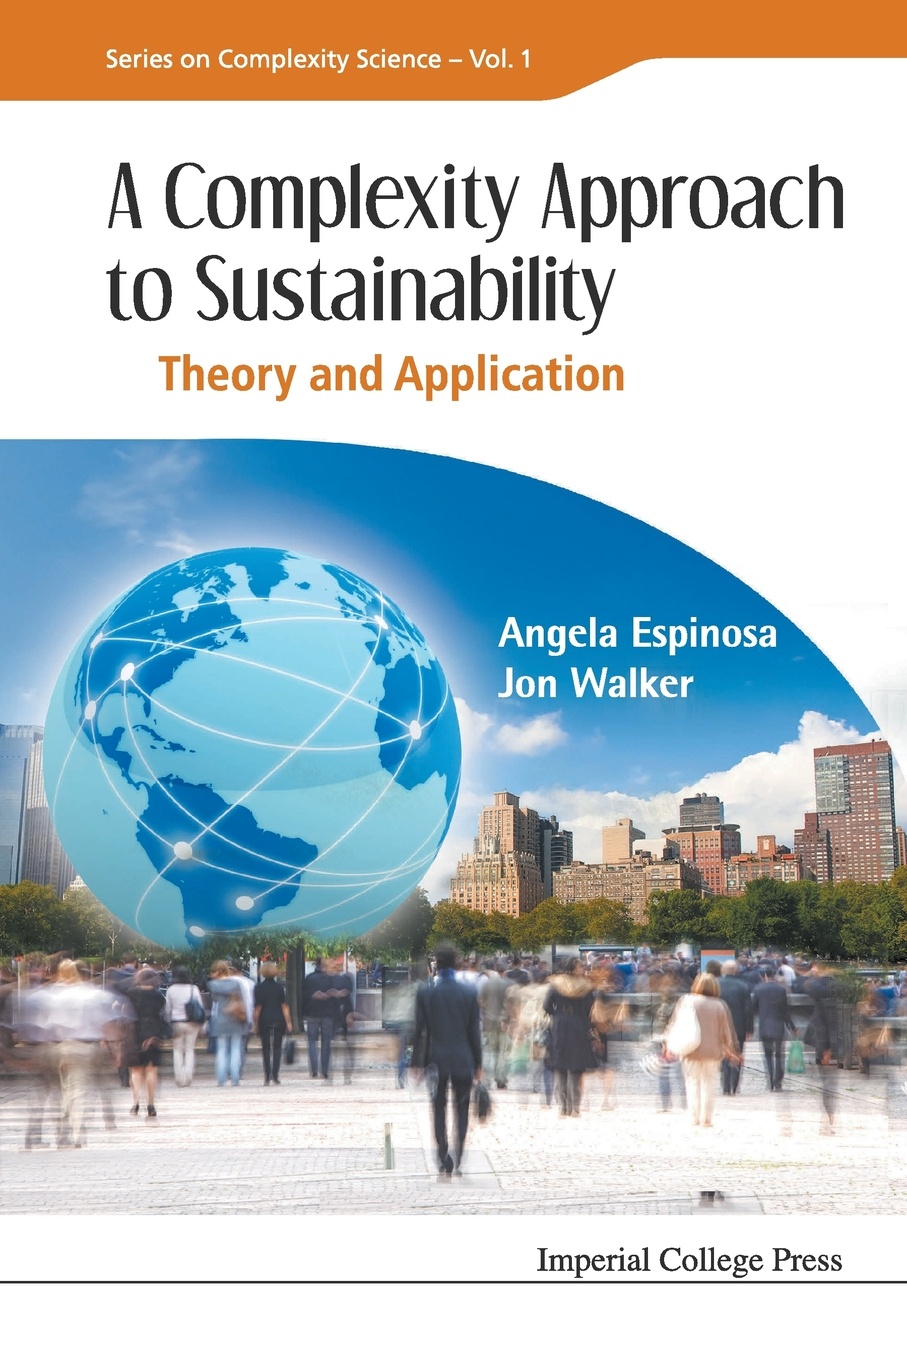 COMPLEXITY APPROACH TO SUSTAINABILITY, A. THEORY AND APPLICATION